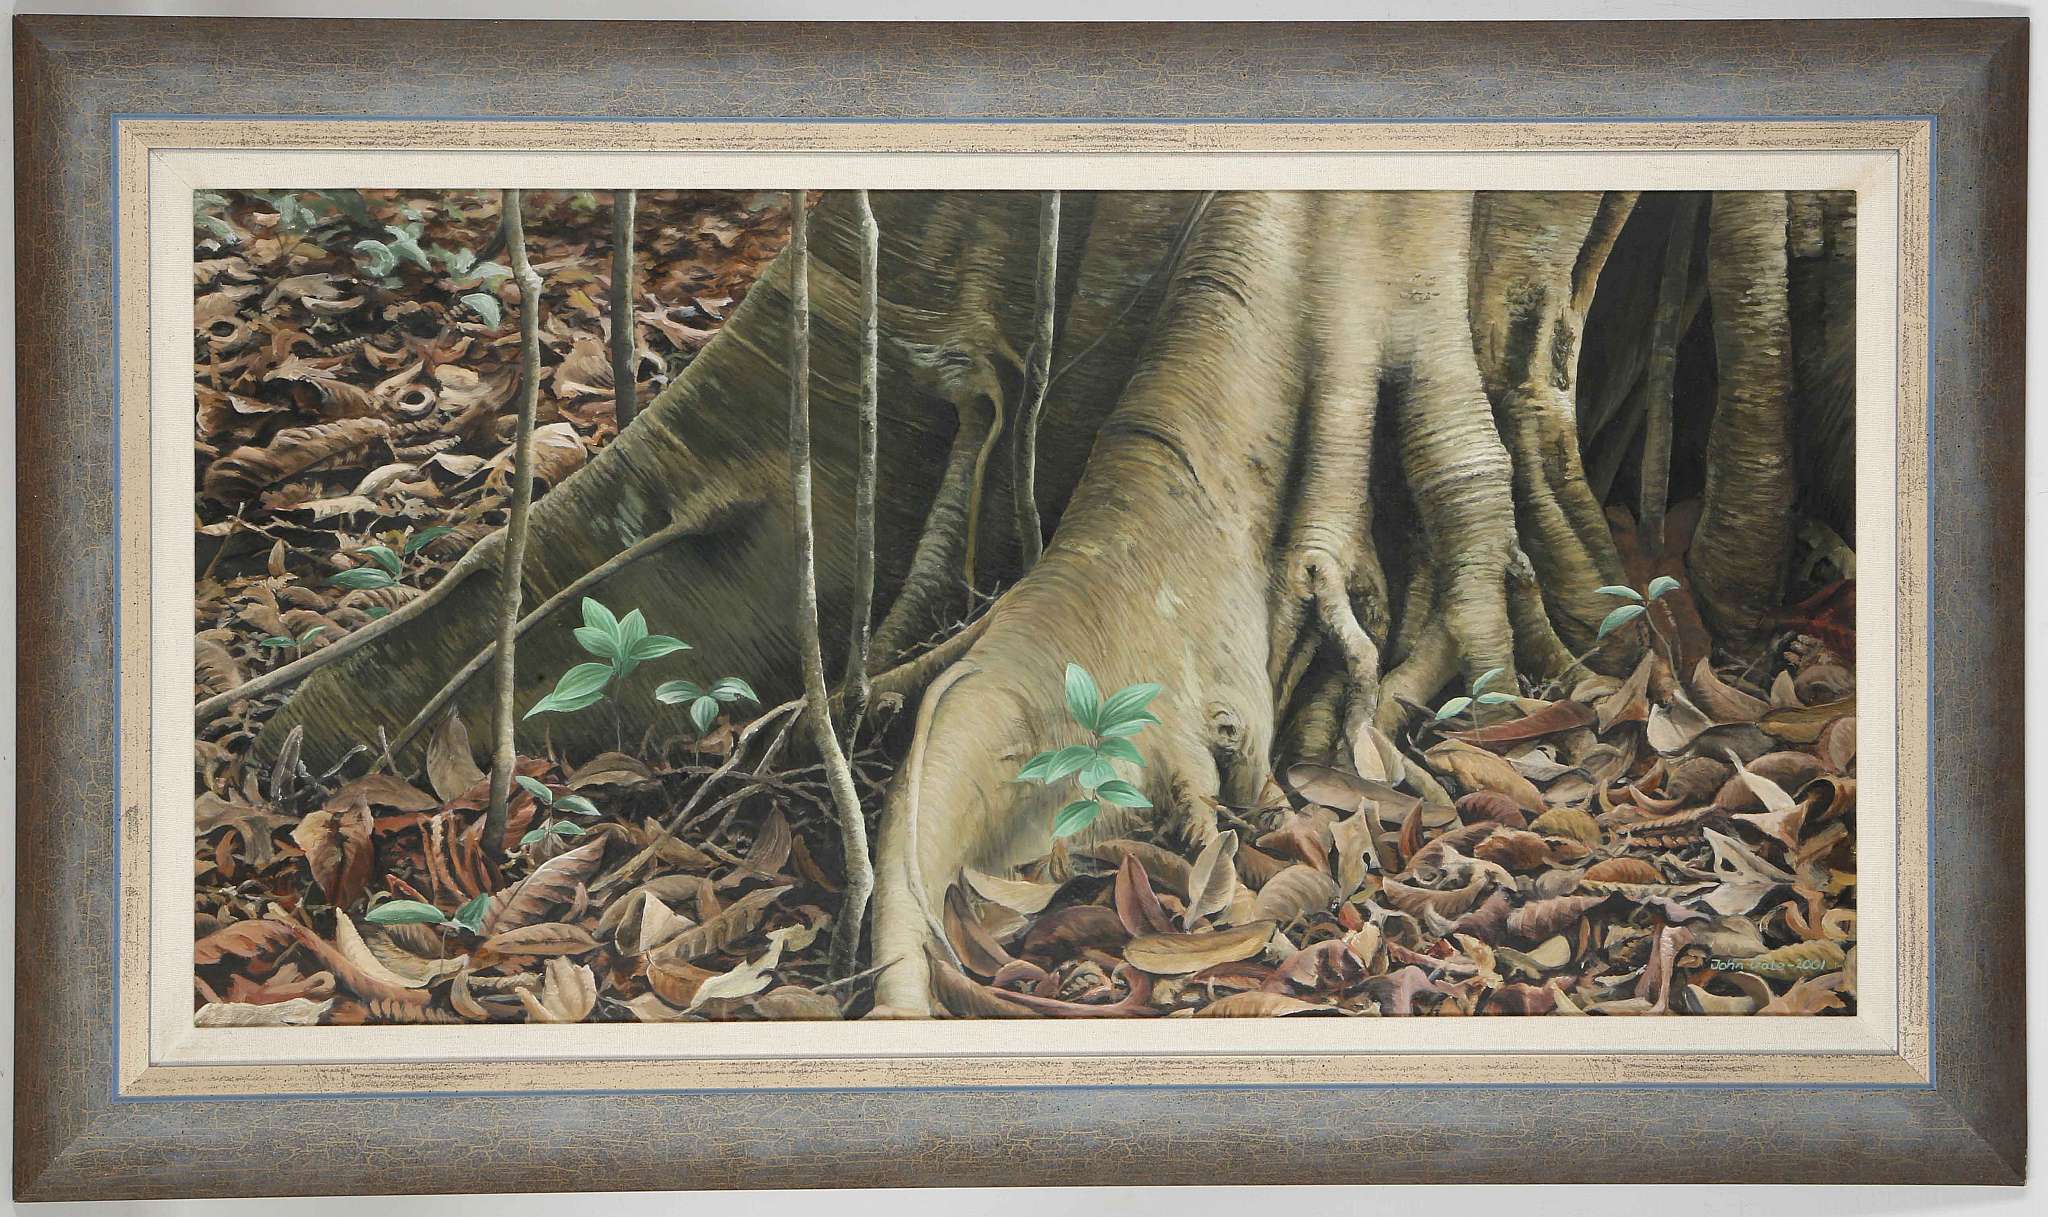 JOHN GALE, British, 20th / 21st century. Woodland study, oil on panel. Signed and dated 2001. 34 x